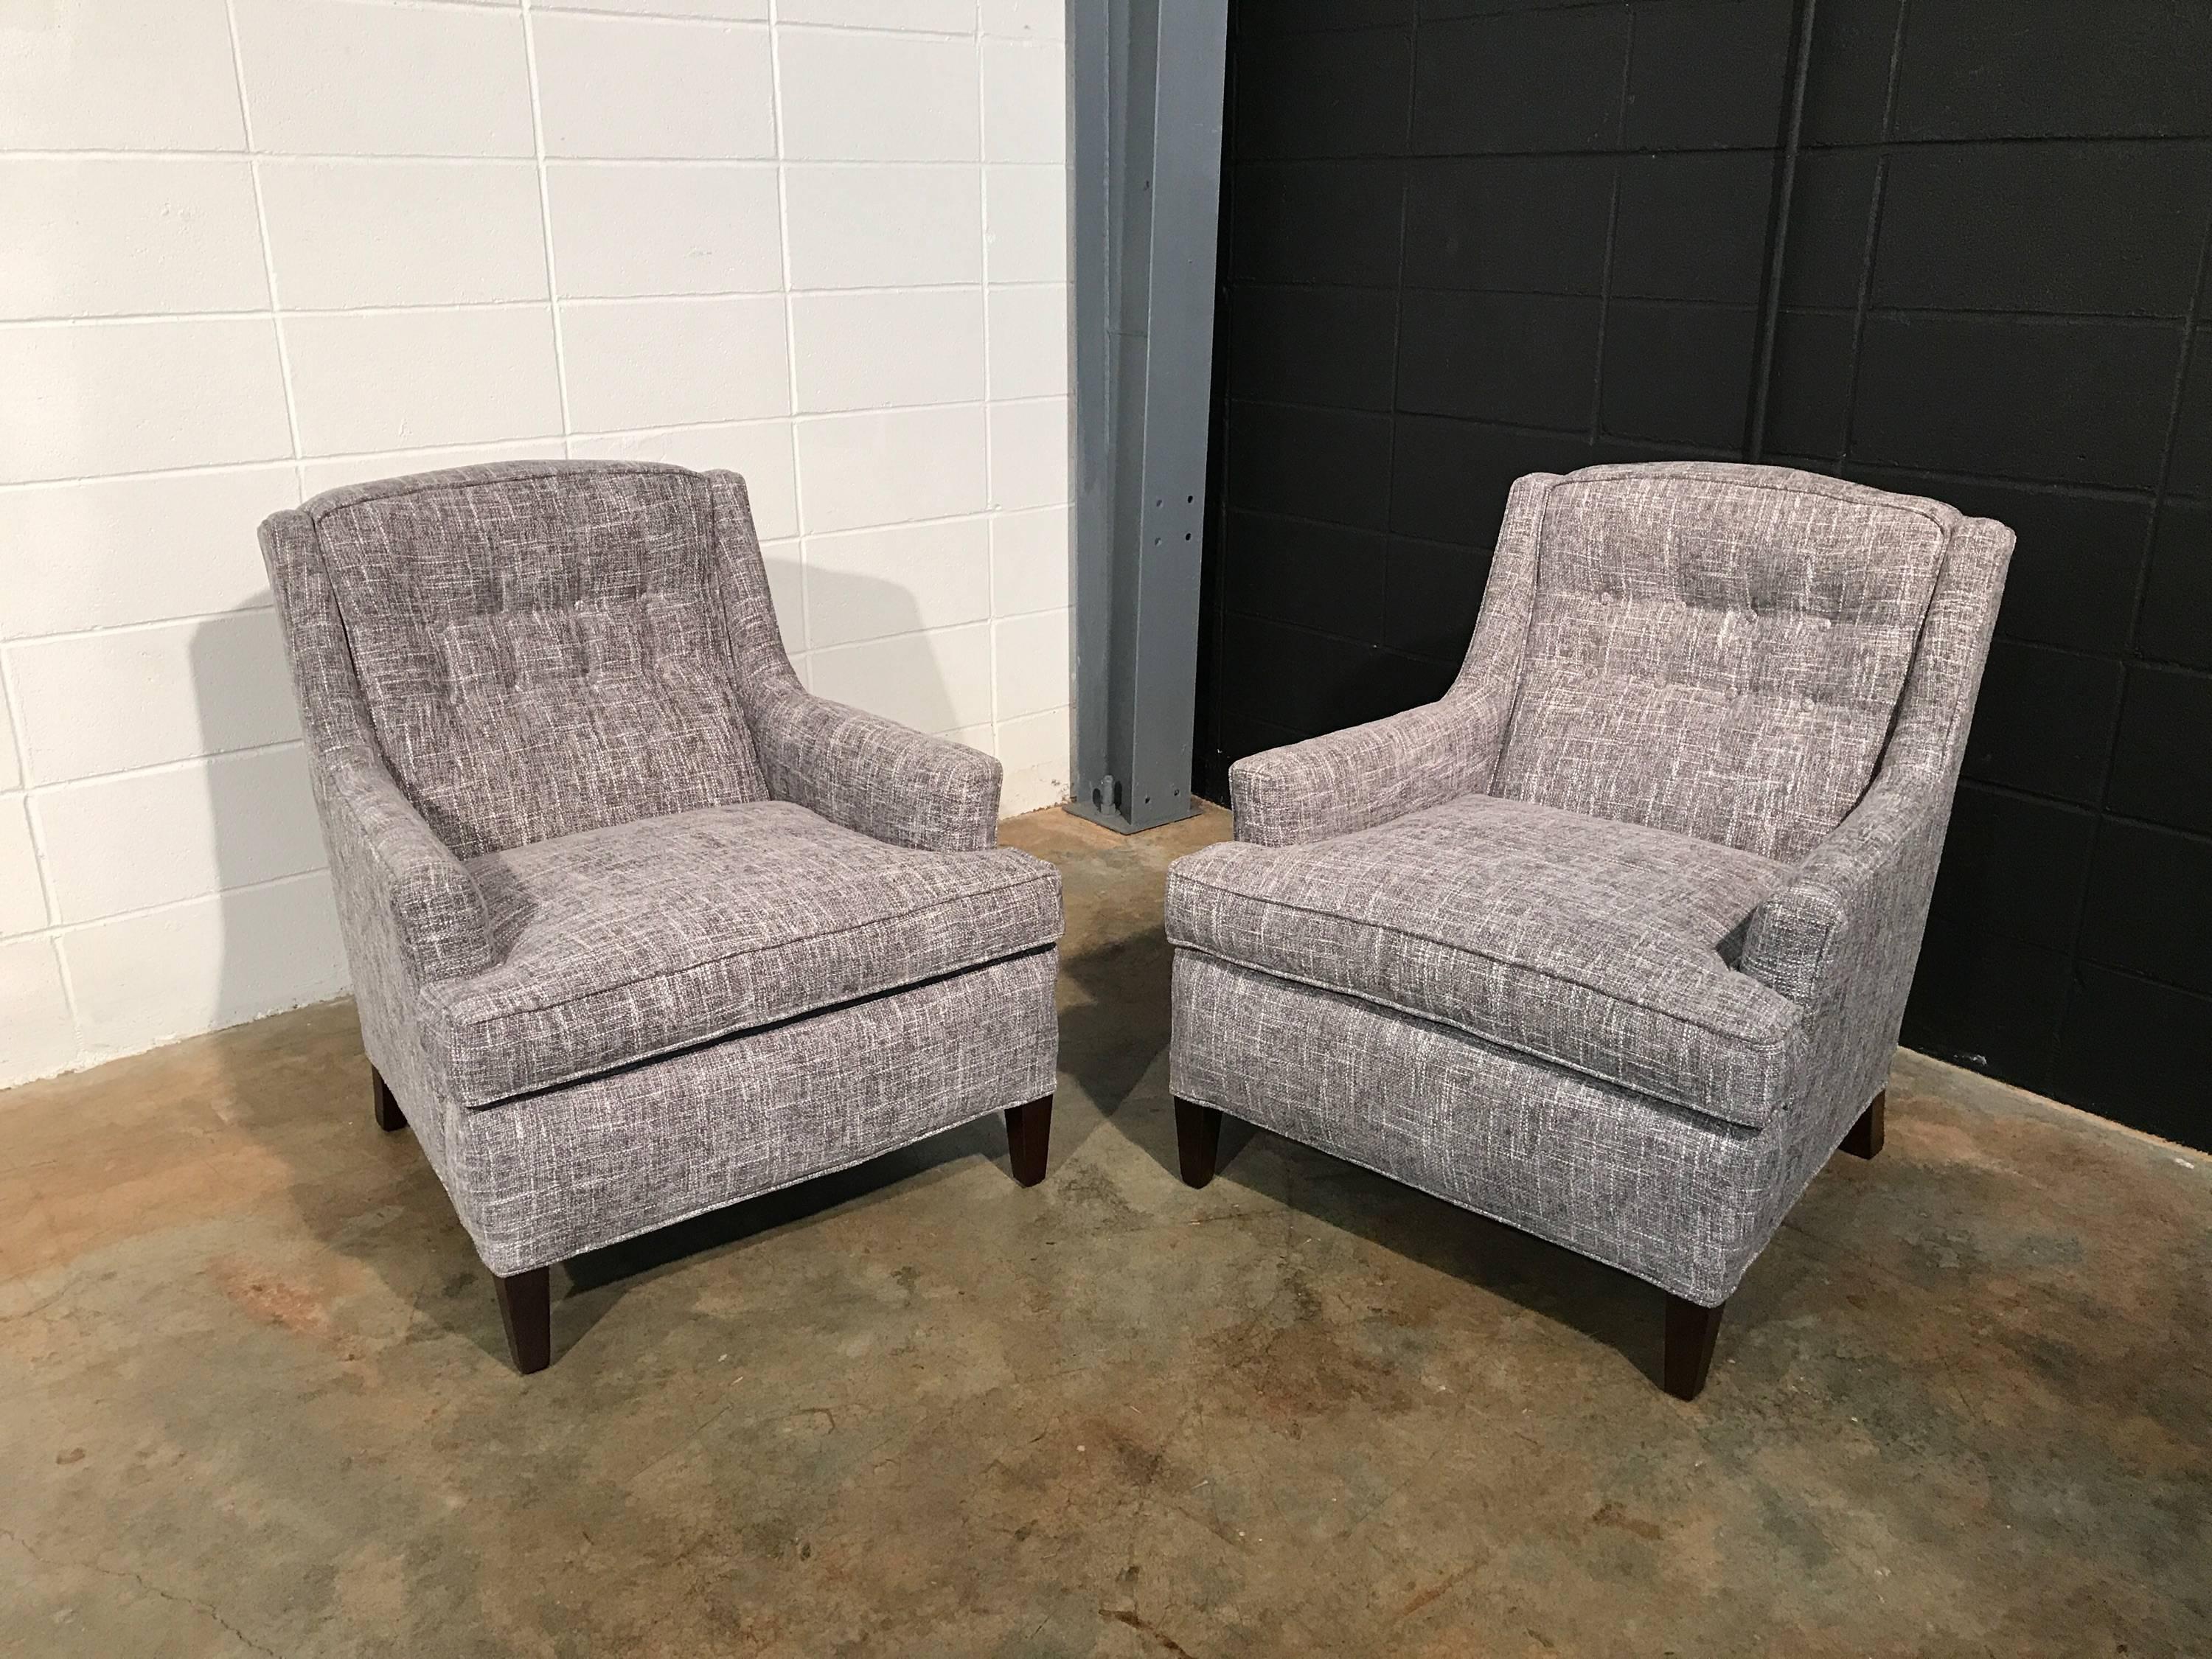 Pair of Restored Mid-Century Modern Lounge Chairs, Gray Upholstery 7